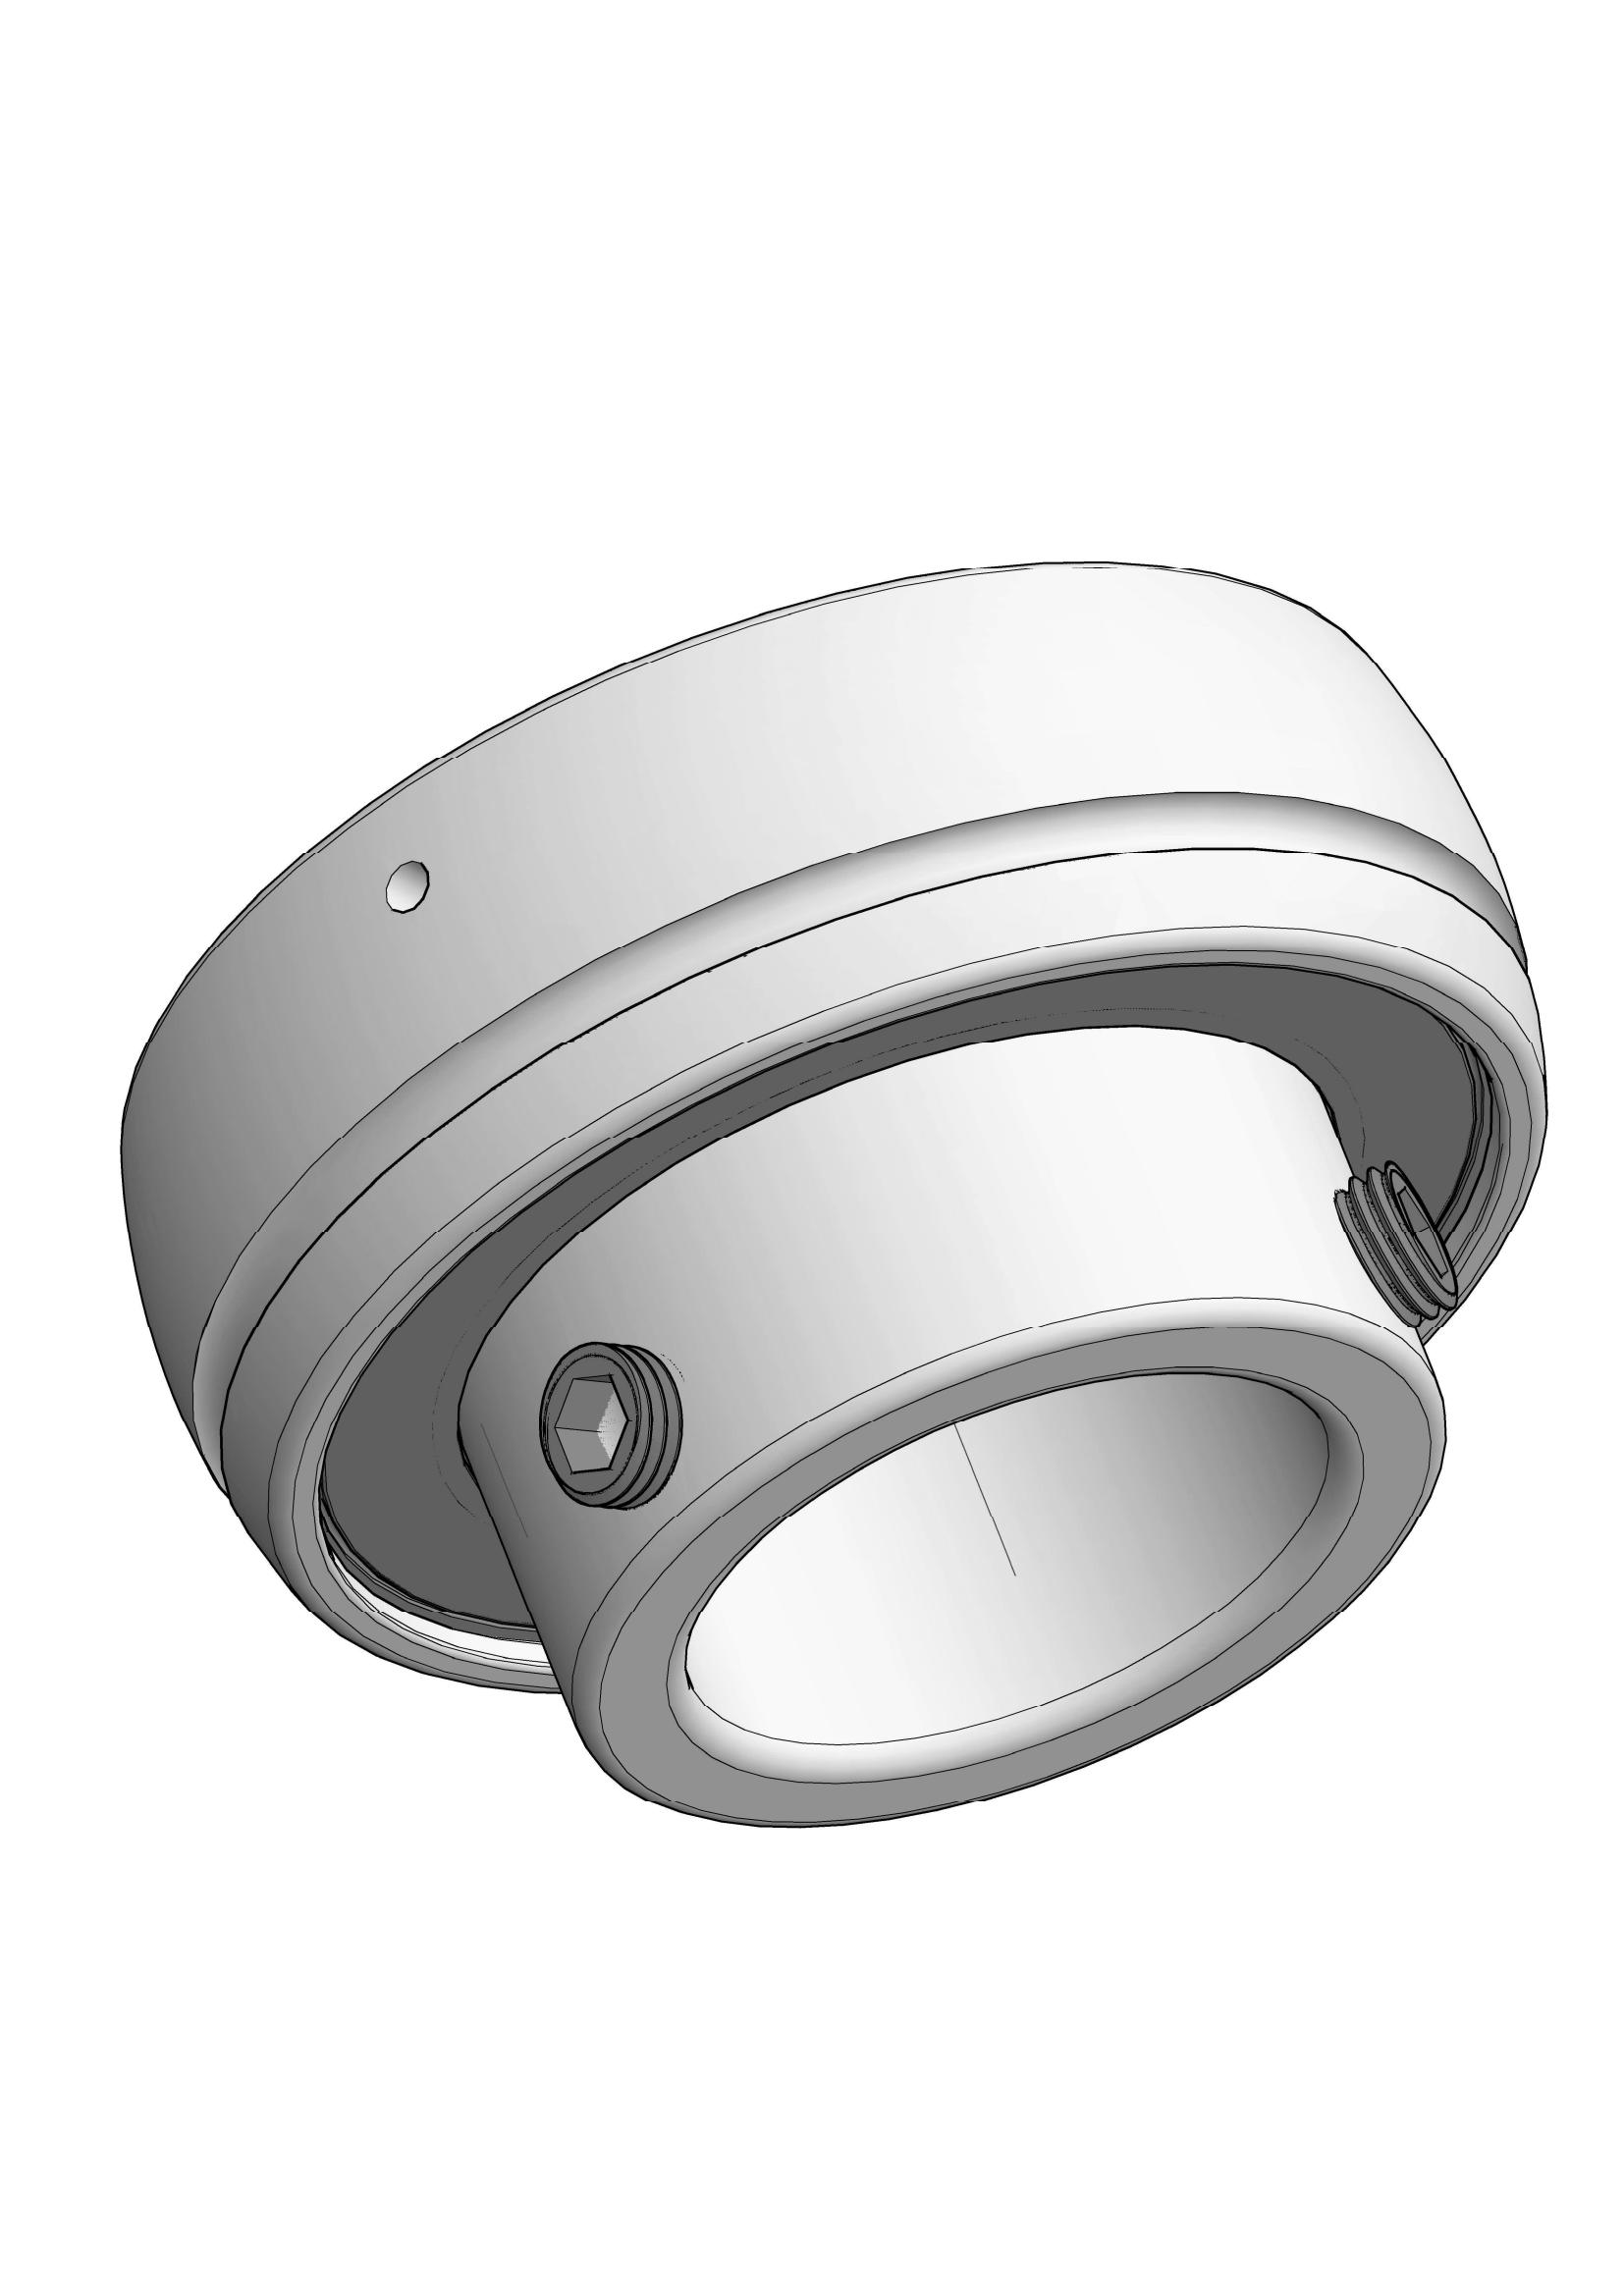 SB208 insert ball bearings with Eccentric Collar Lock with 40mm Bore